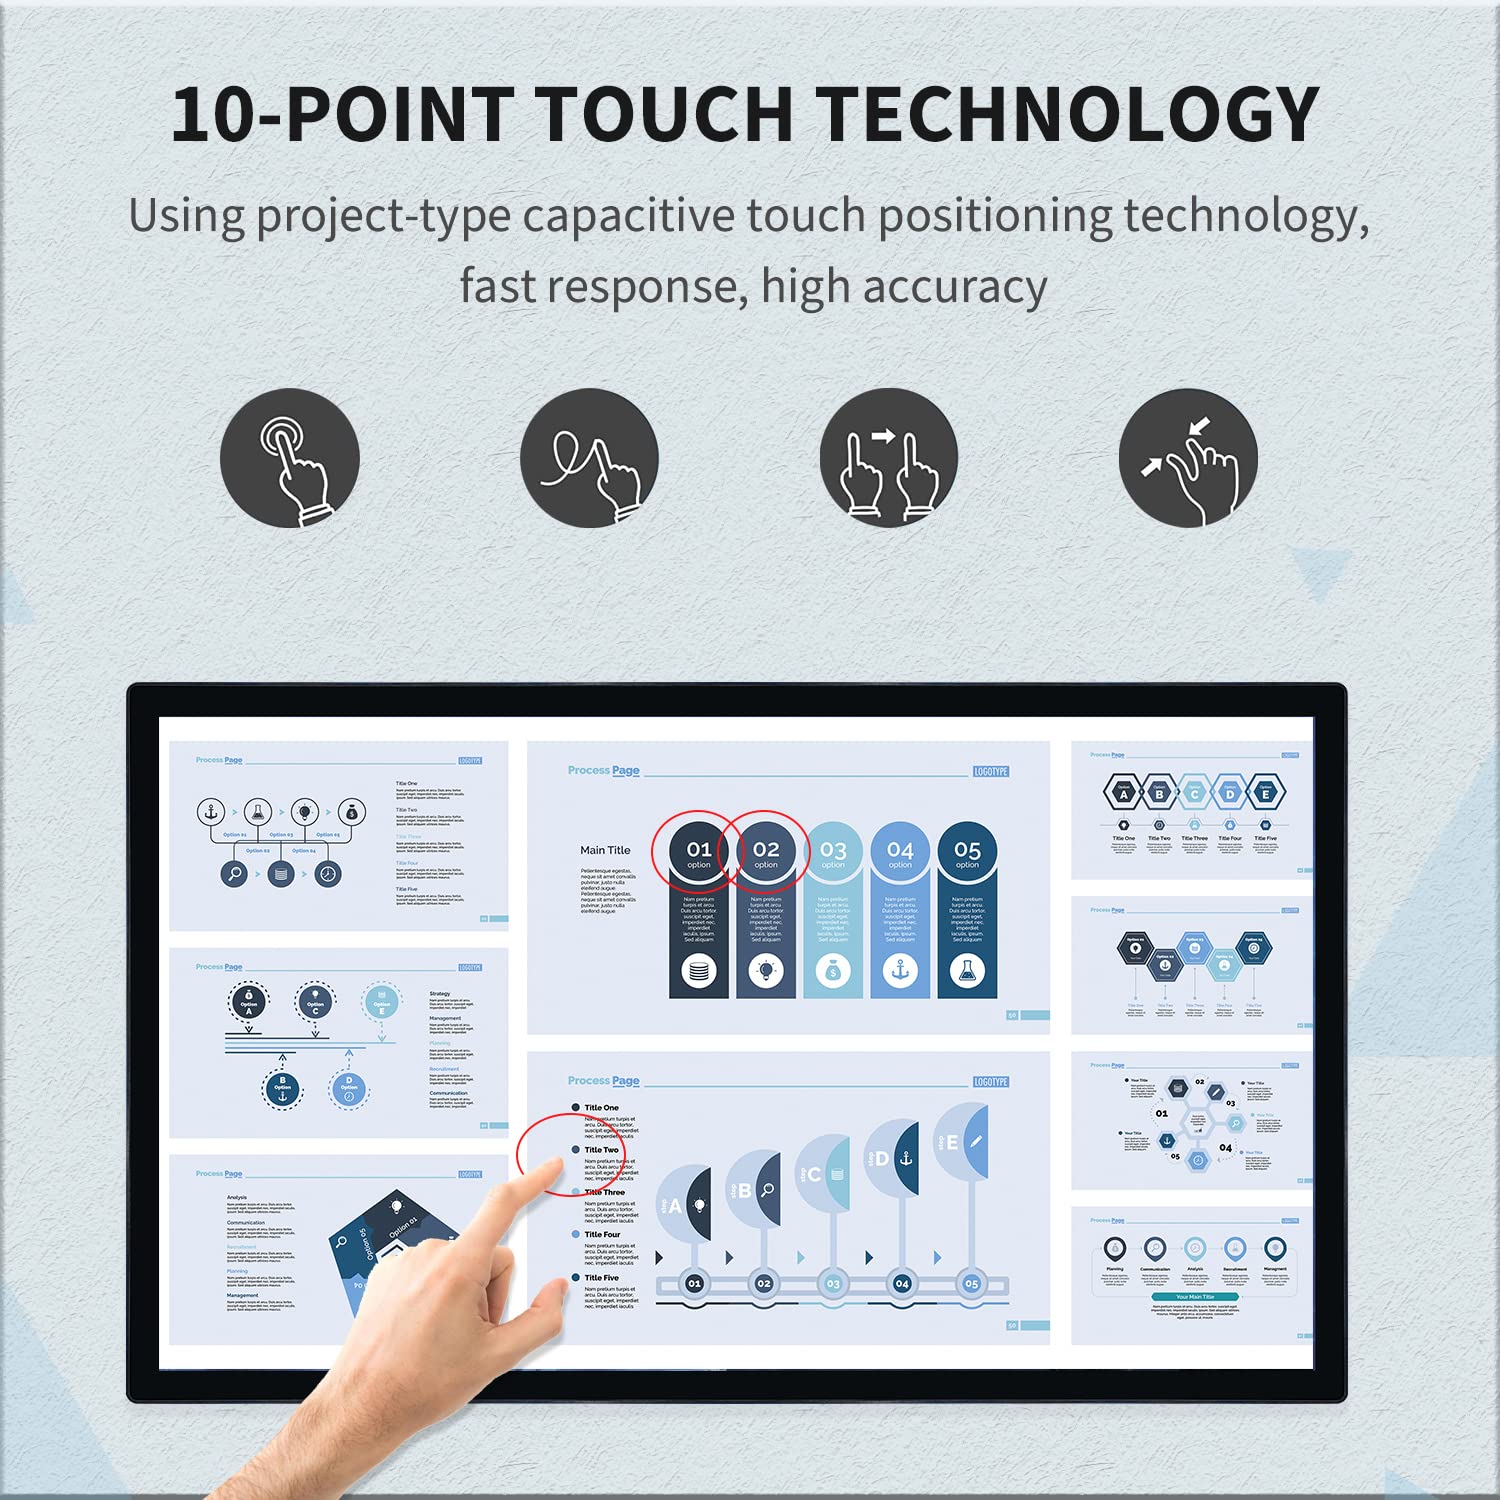 TouchWo 43 inch Capacitive Multi-Touch Screen Industrial Monitor, 16:9 Display 1920 x 1080P, Built-in Speakers, USB, VGA, DVI & HD-MI Ports, Digital Signage Displays and Player for Advertising